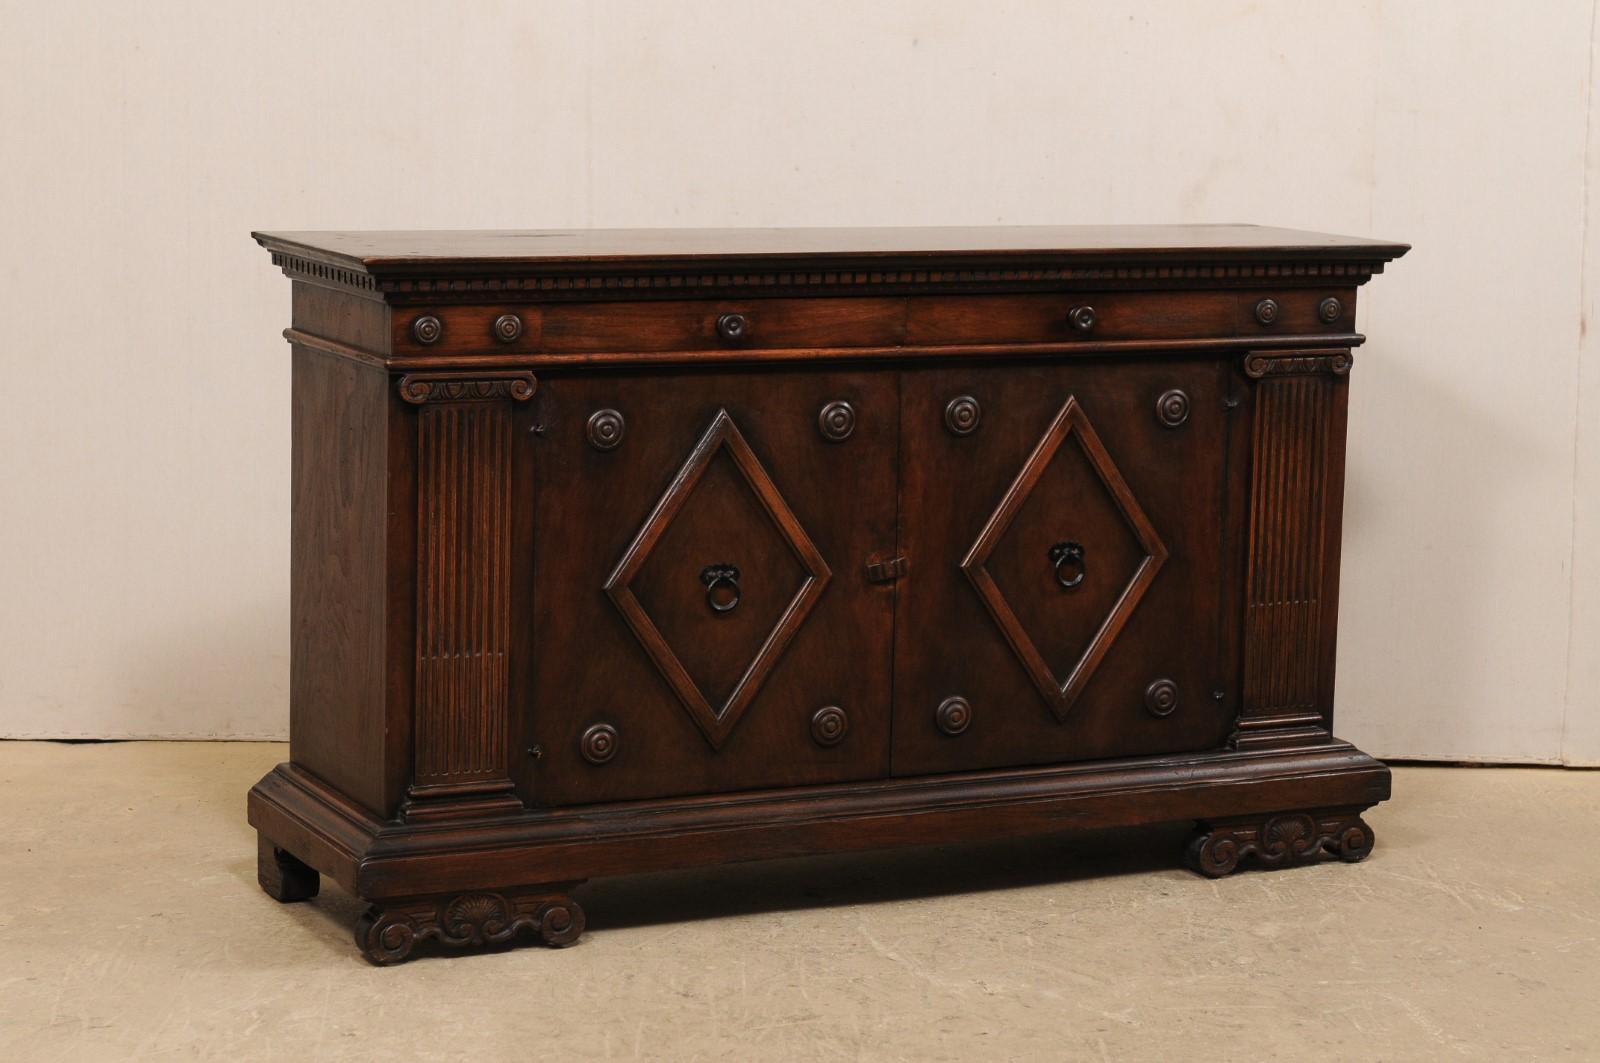 An Italian style carved wood credenza from the mid-20th century. This vintage American-made cabinet of rich, walnut wood is rectangular-shaped, with a slightly overhanging top which is beautifully decorated with stacked molding and dentil trim